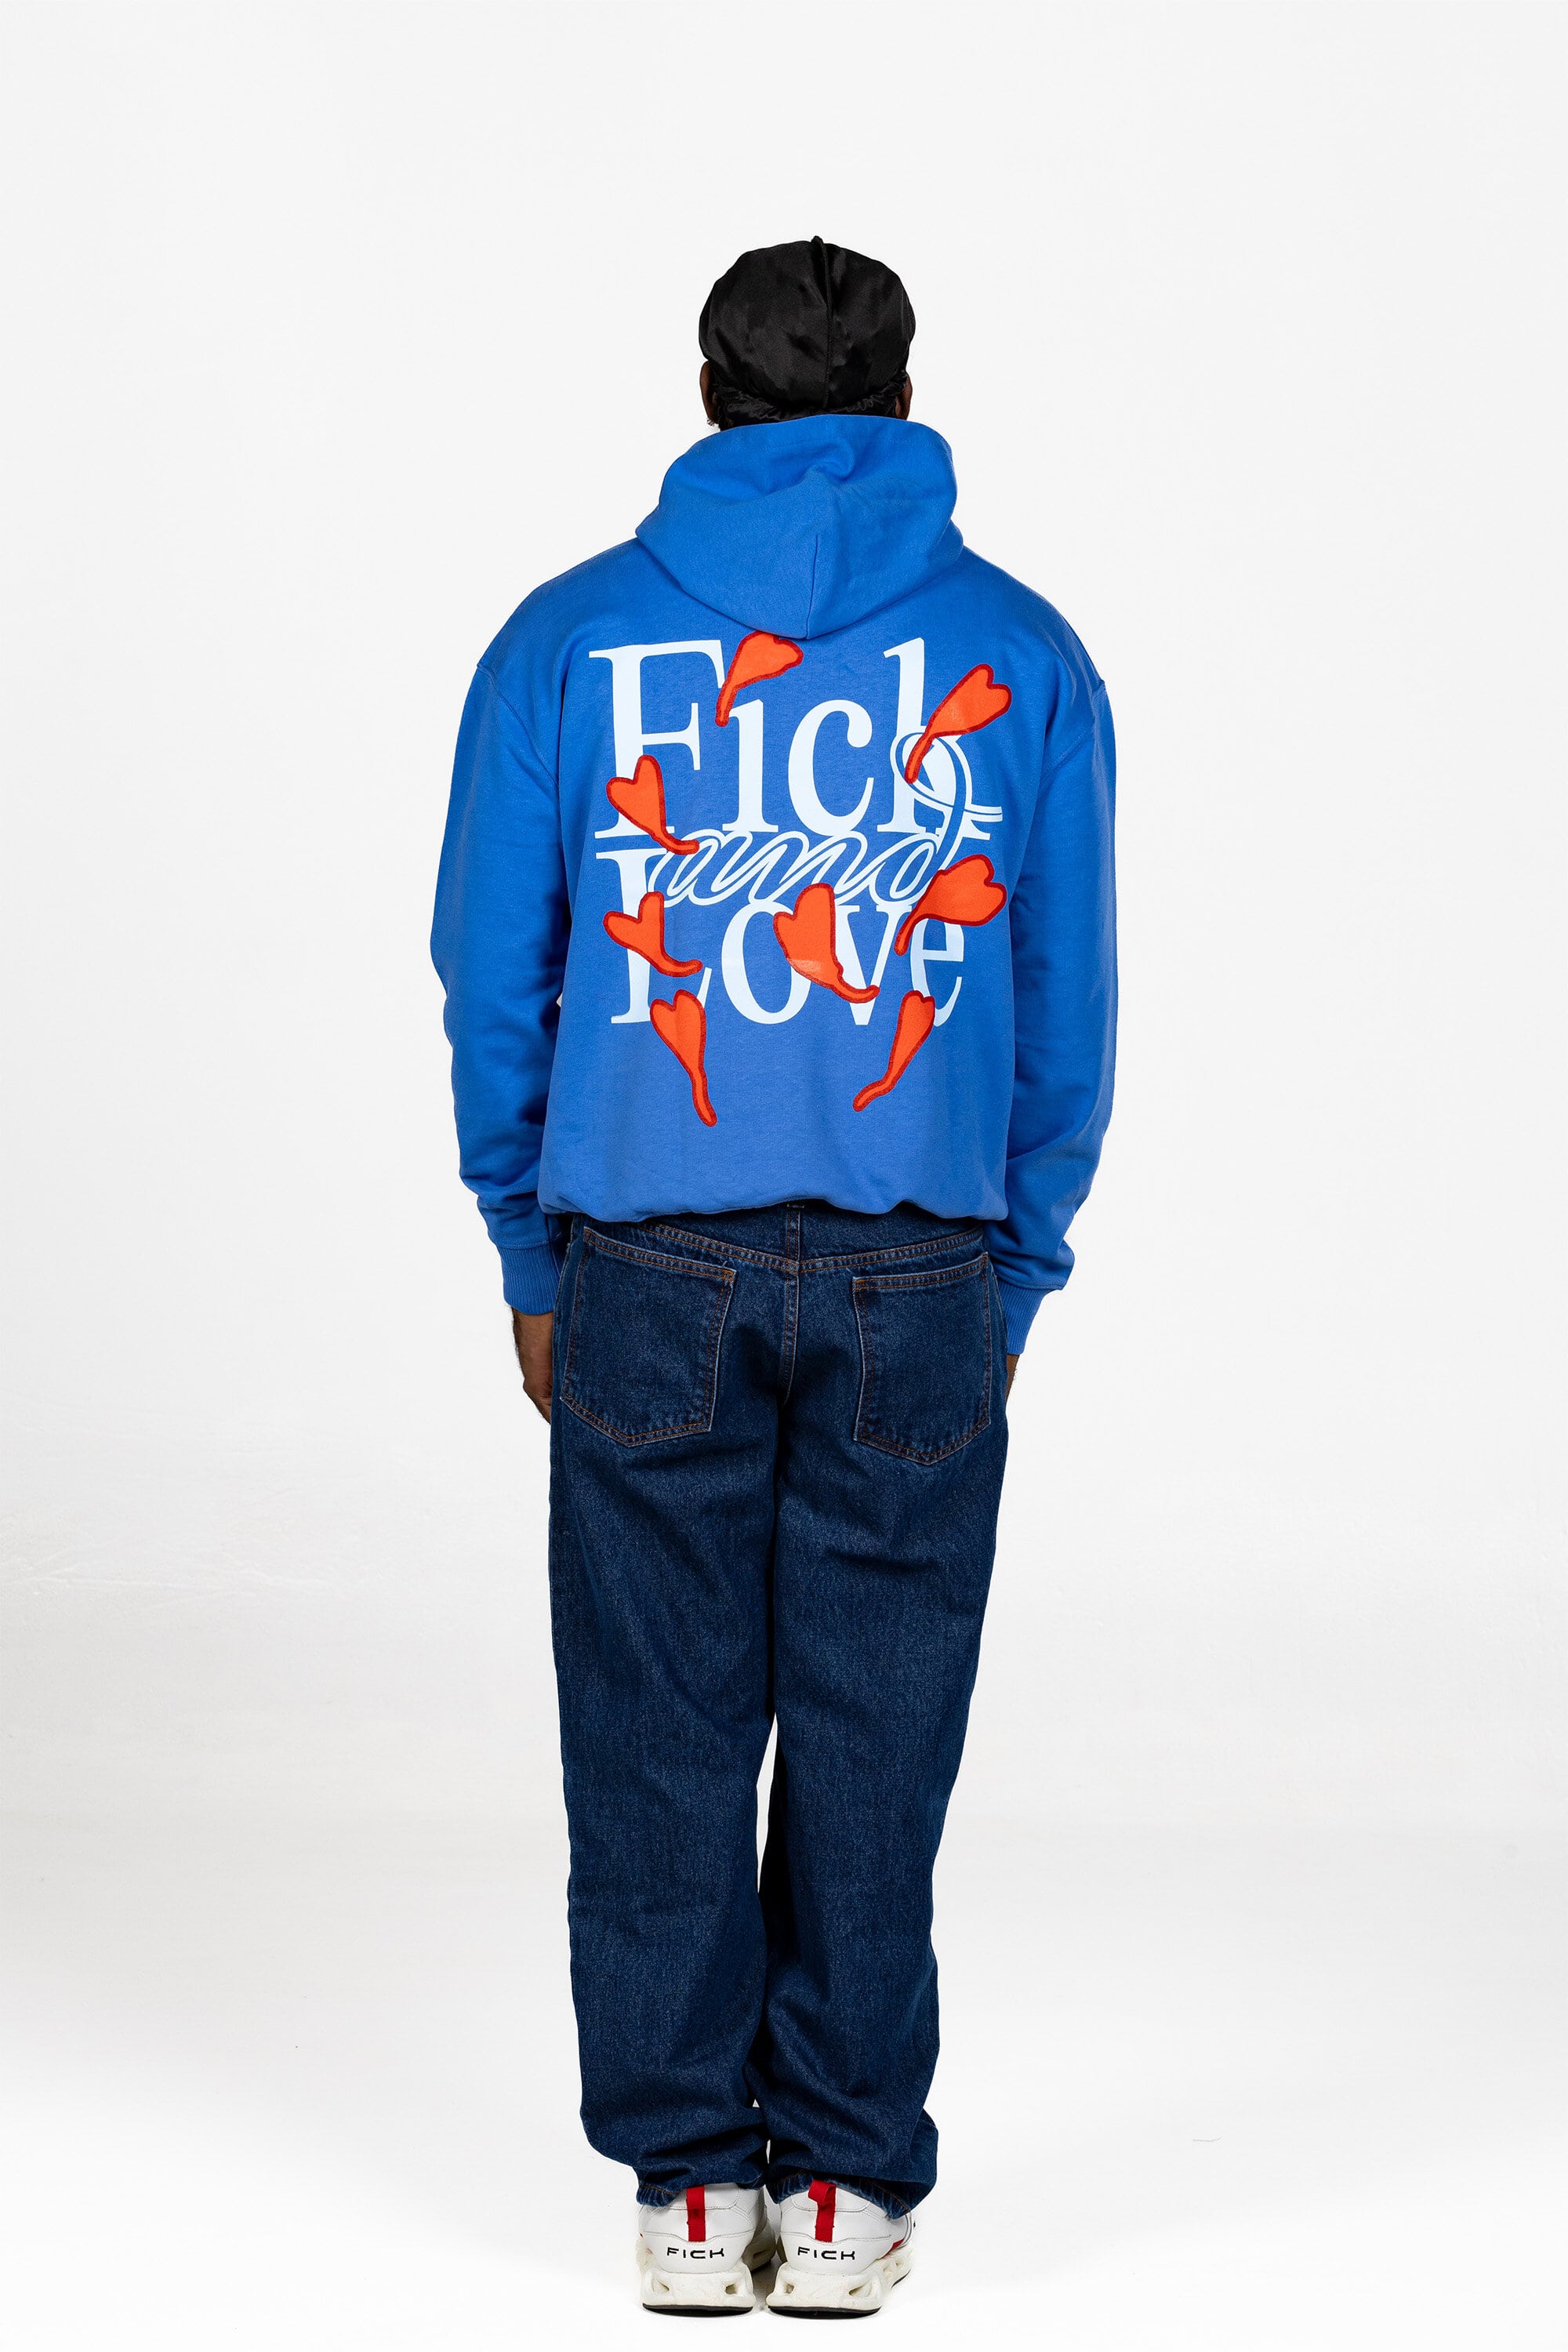 Hoodie Fick and Love Blue